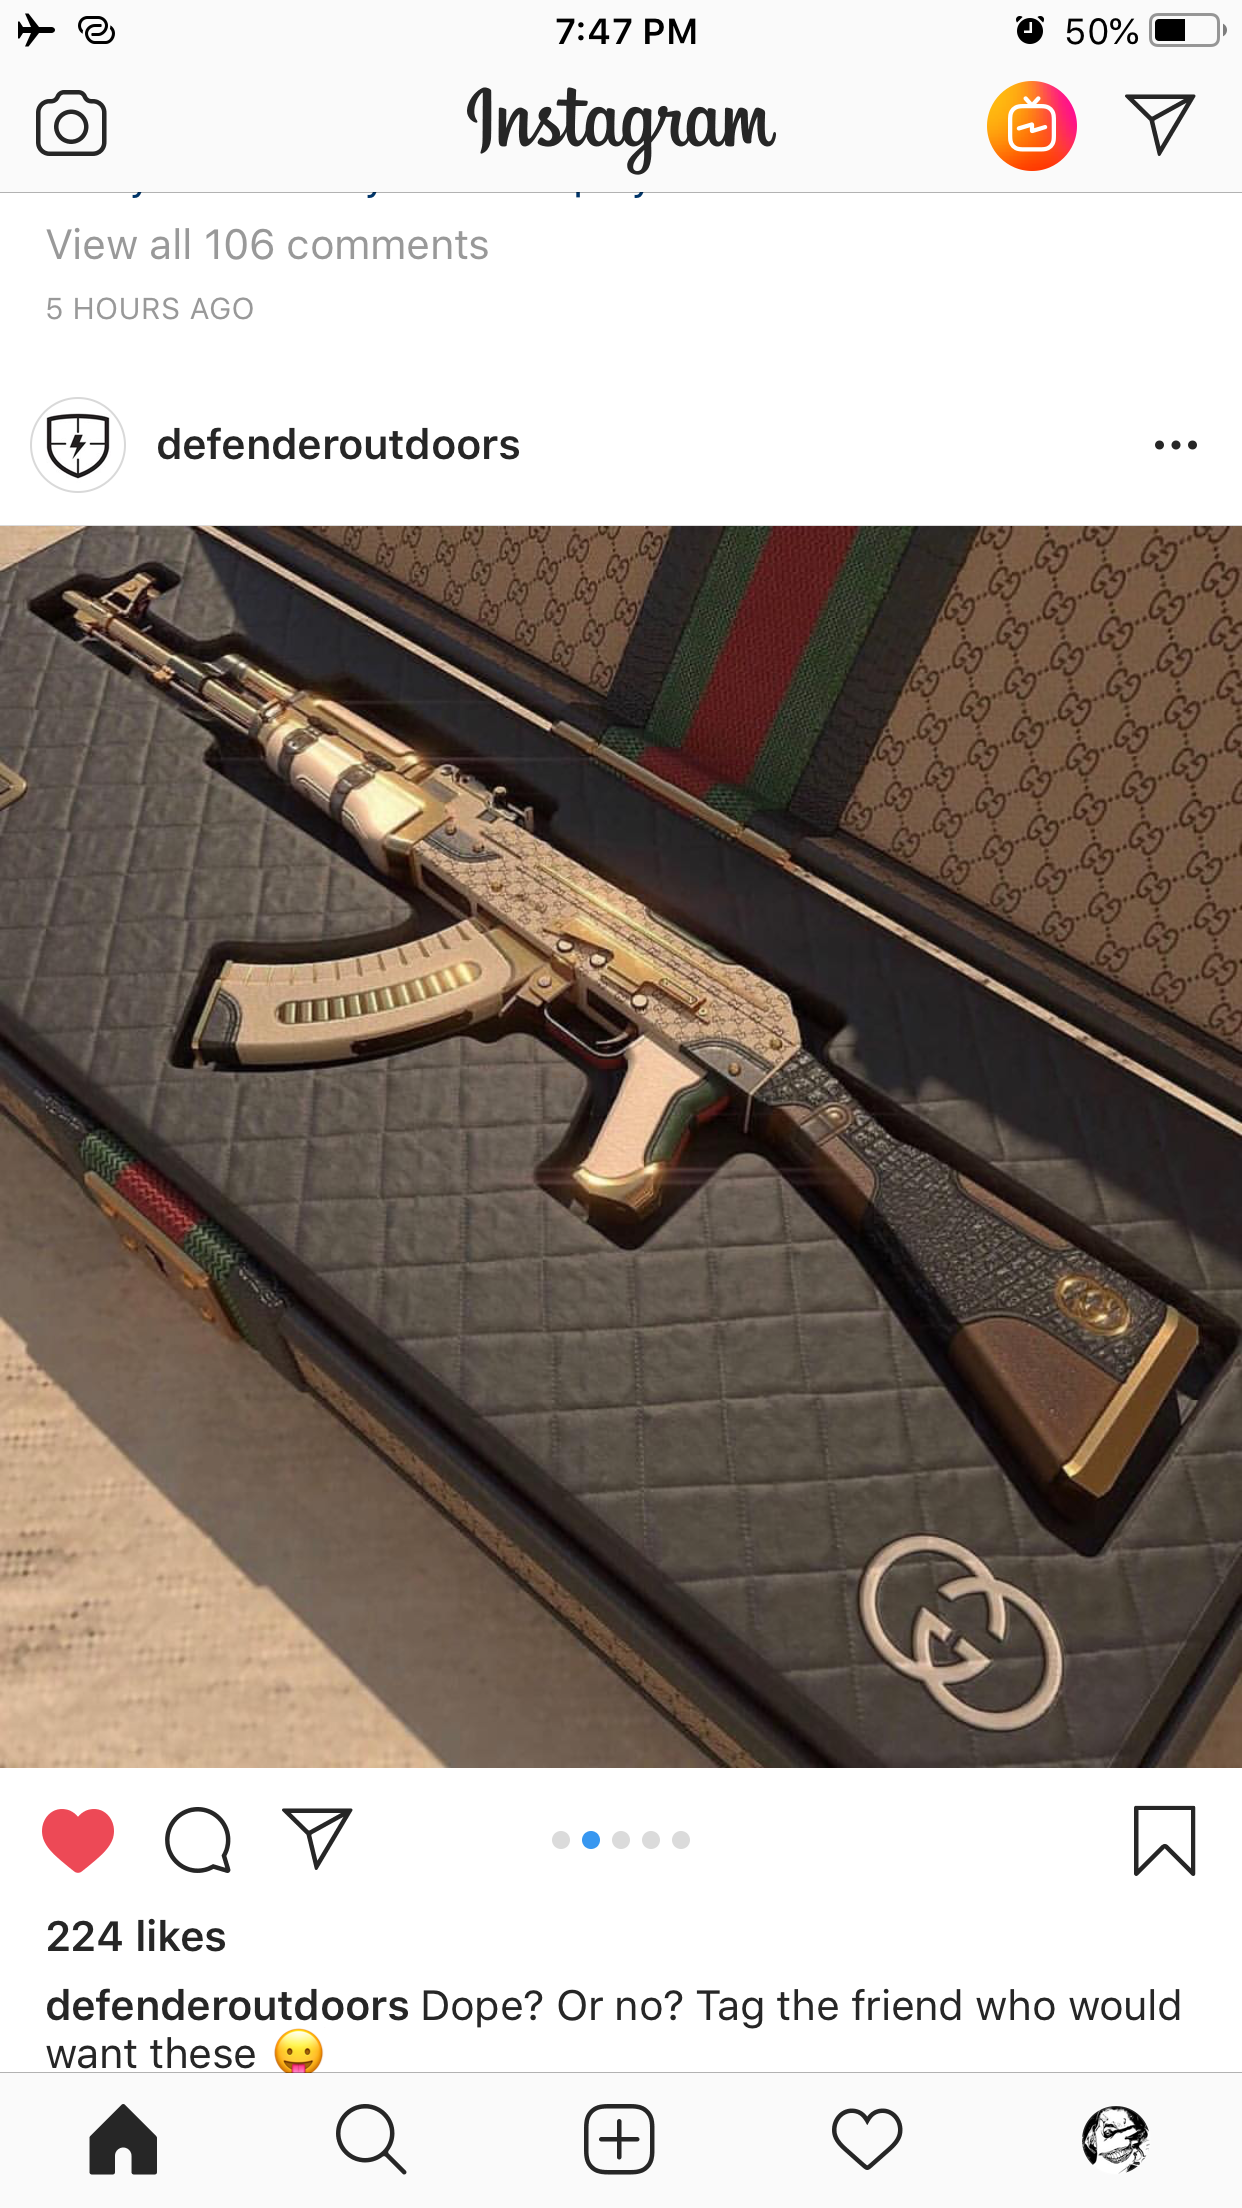 random pic gucci ak 47 - 50% Instagram View all 106 Shours Ago defenderoutdoors Qy ... 224 defenderoutdoors Dope? Or no? Tag the friend who would want these